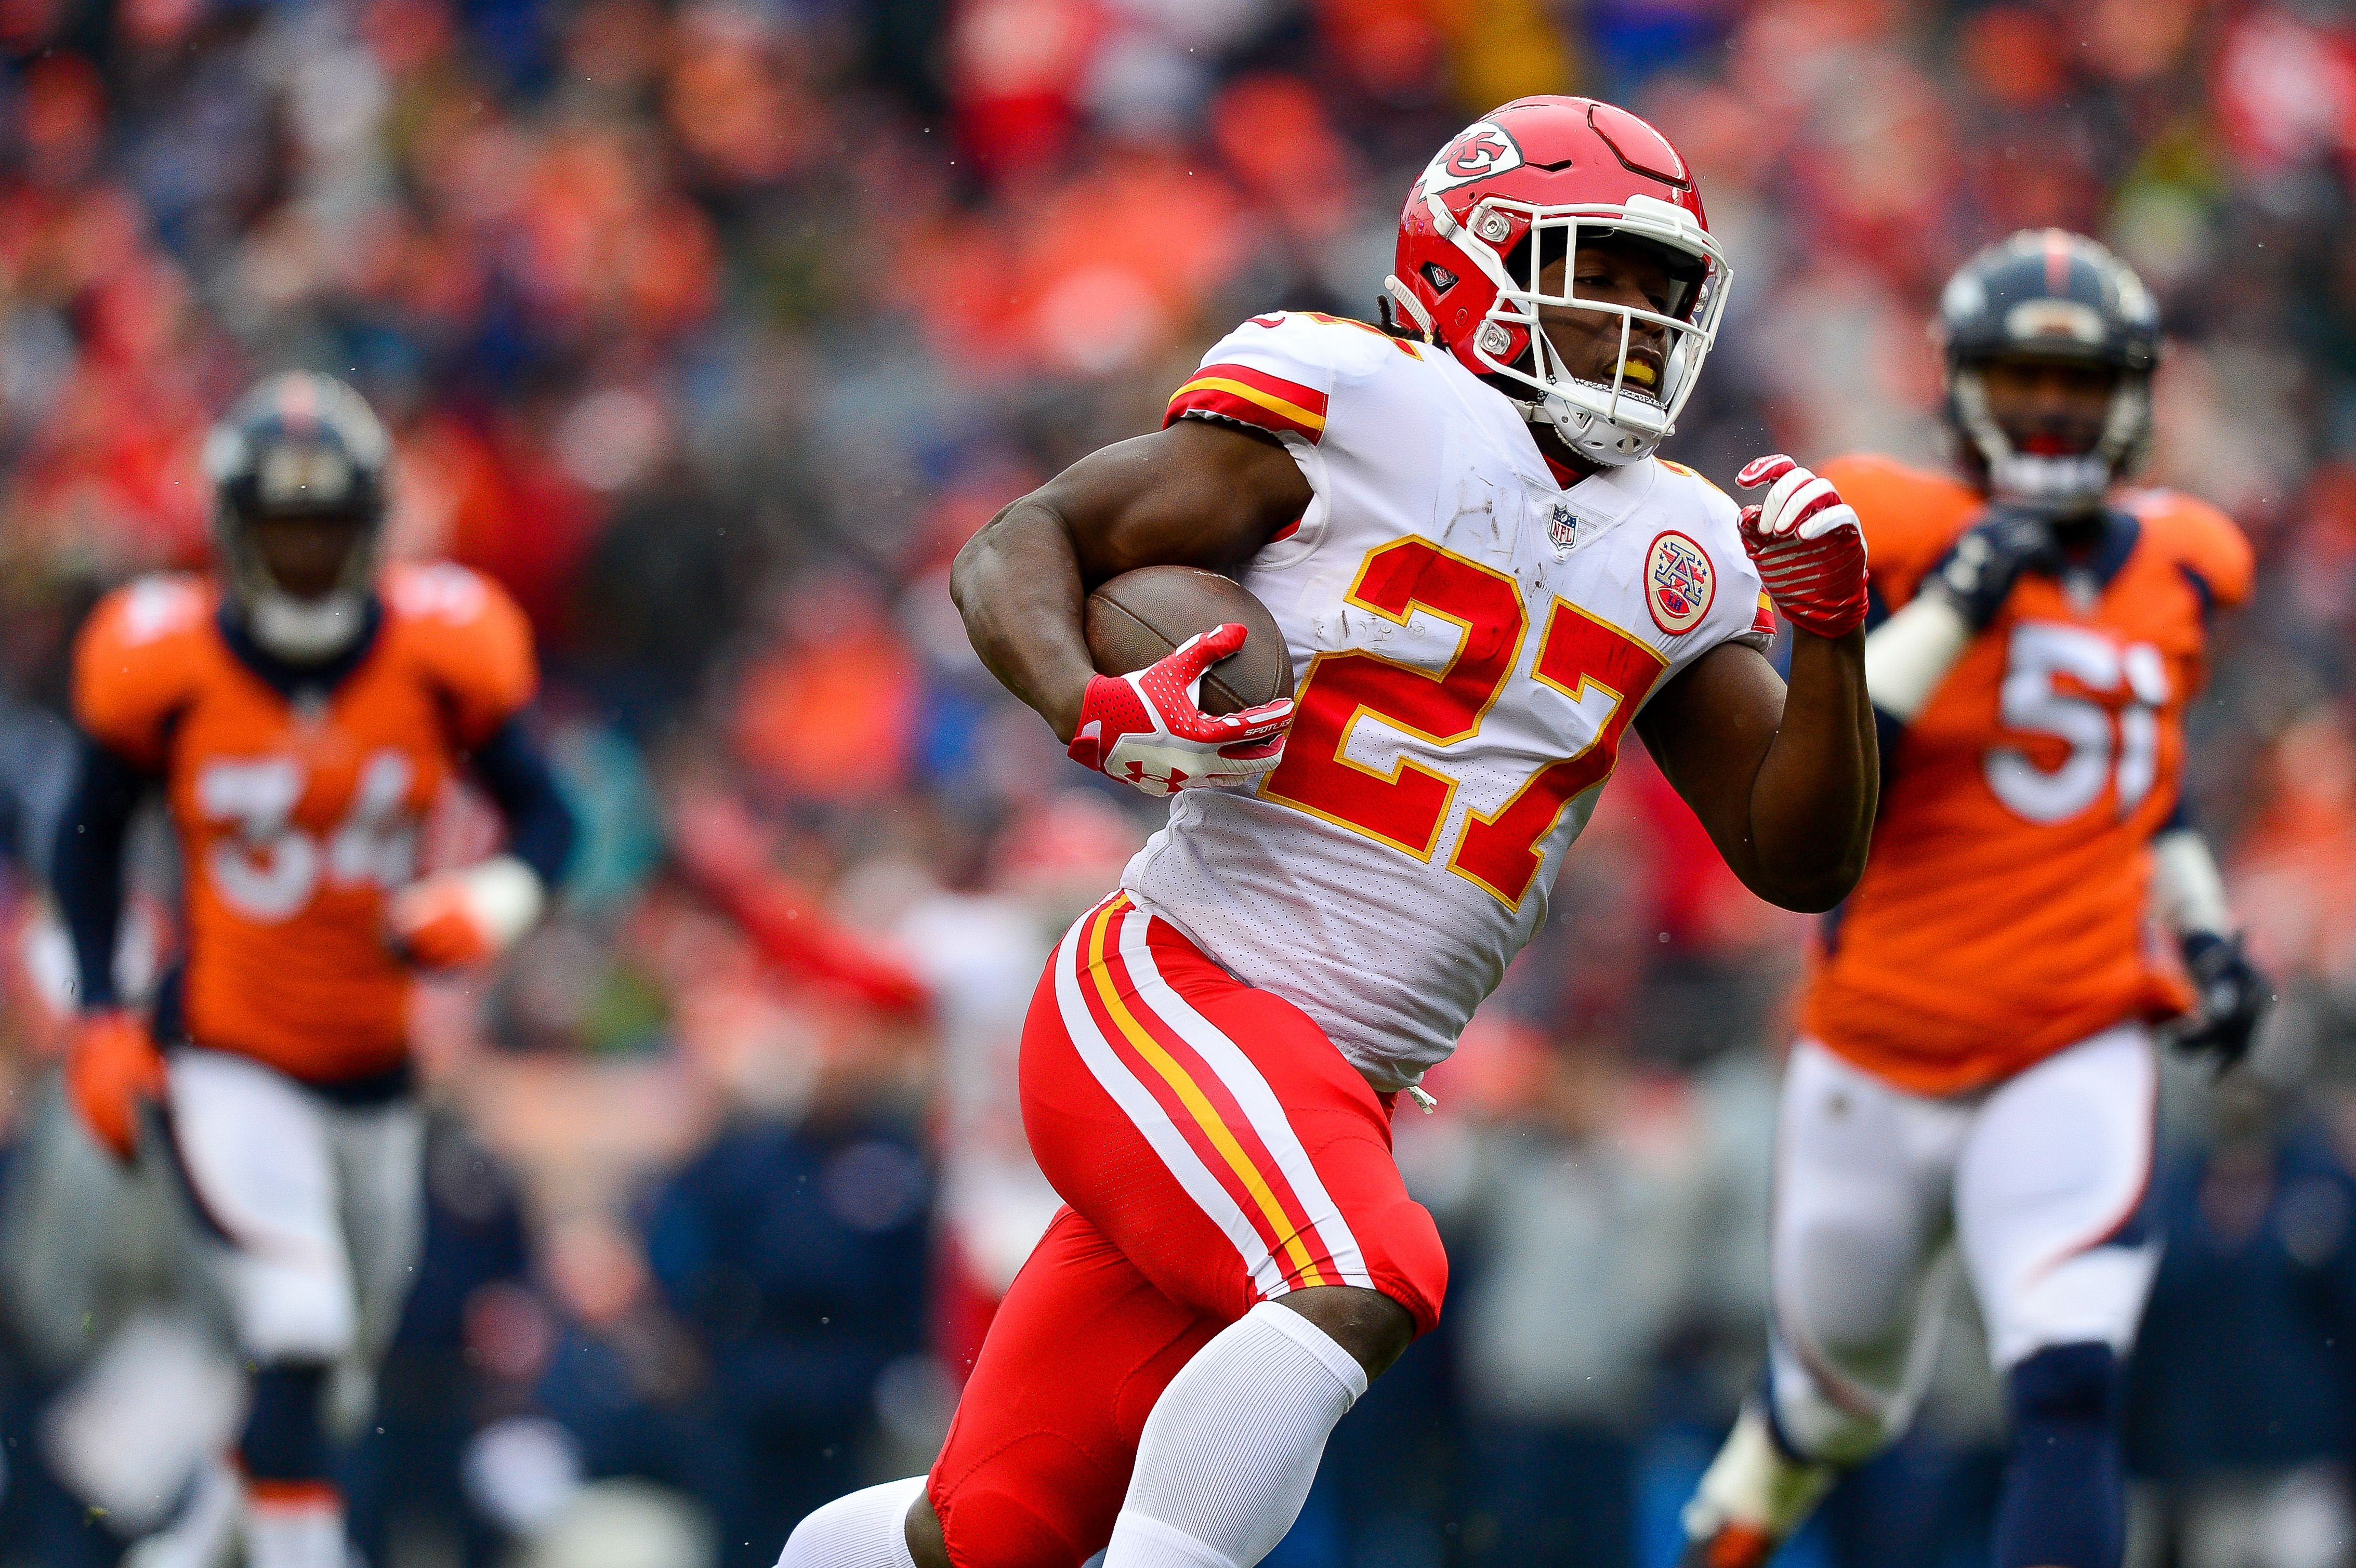 The Kansas City Chiefs face difficult roster decisions at running back